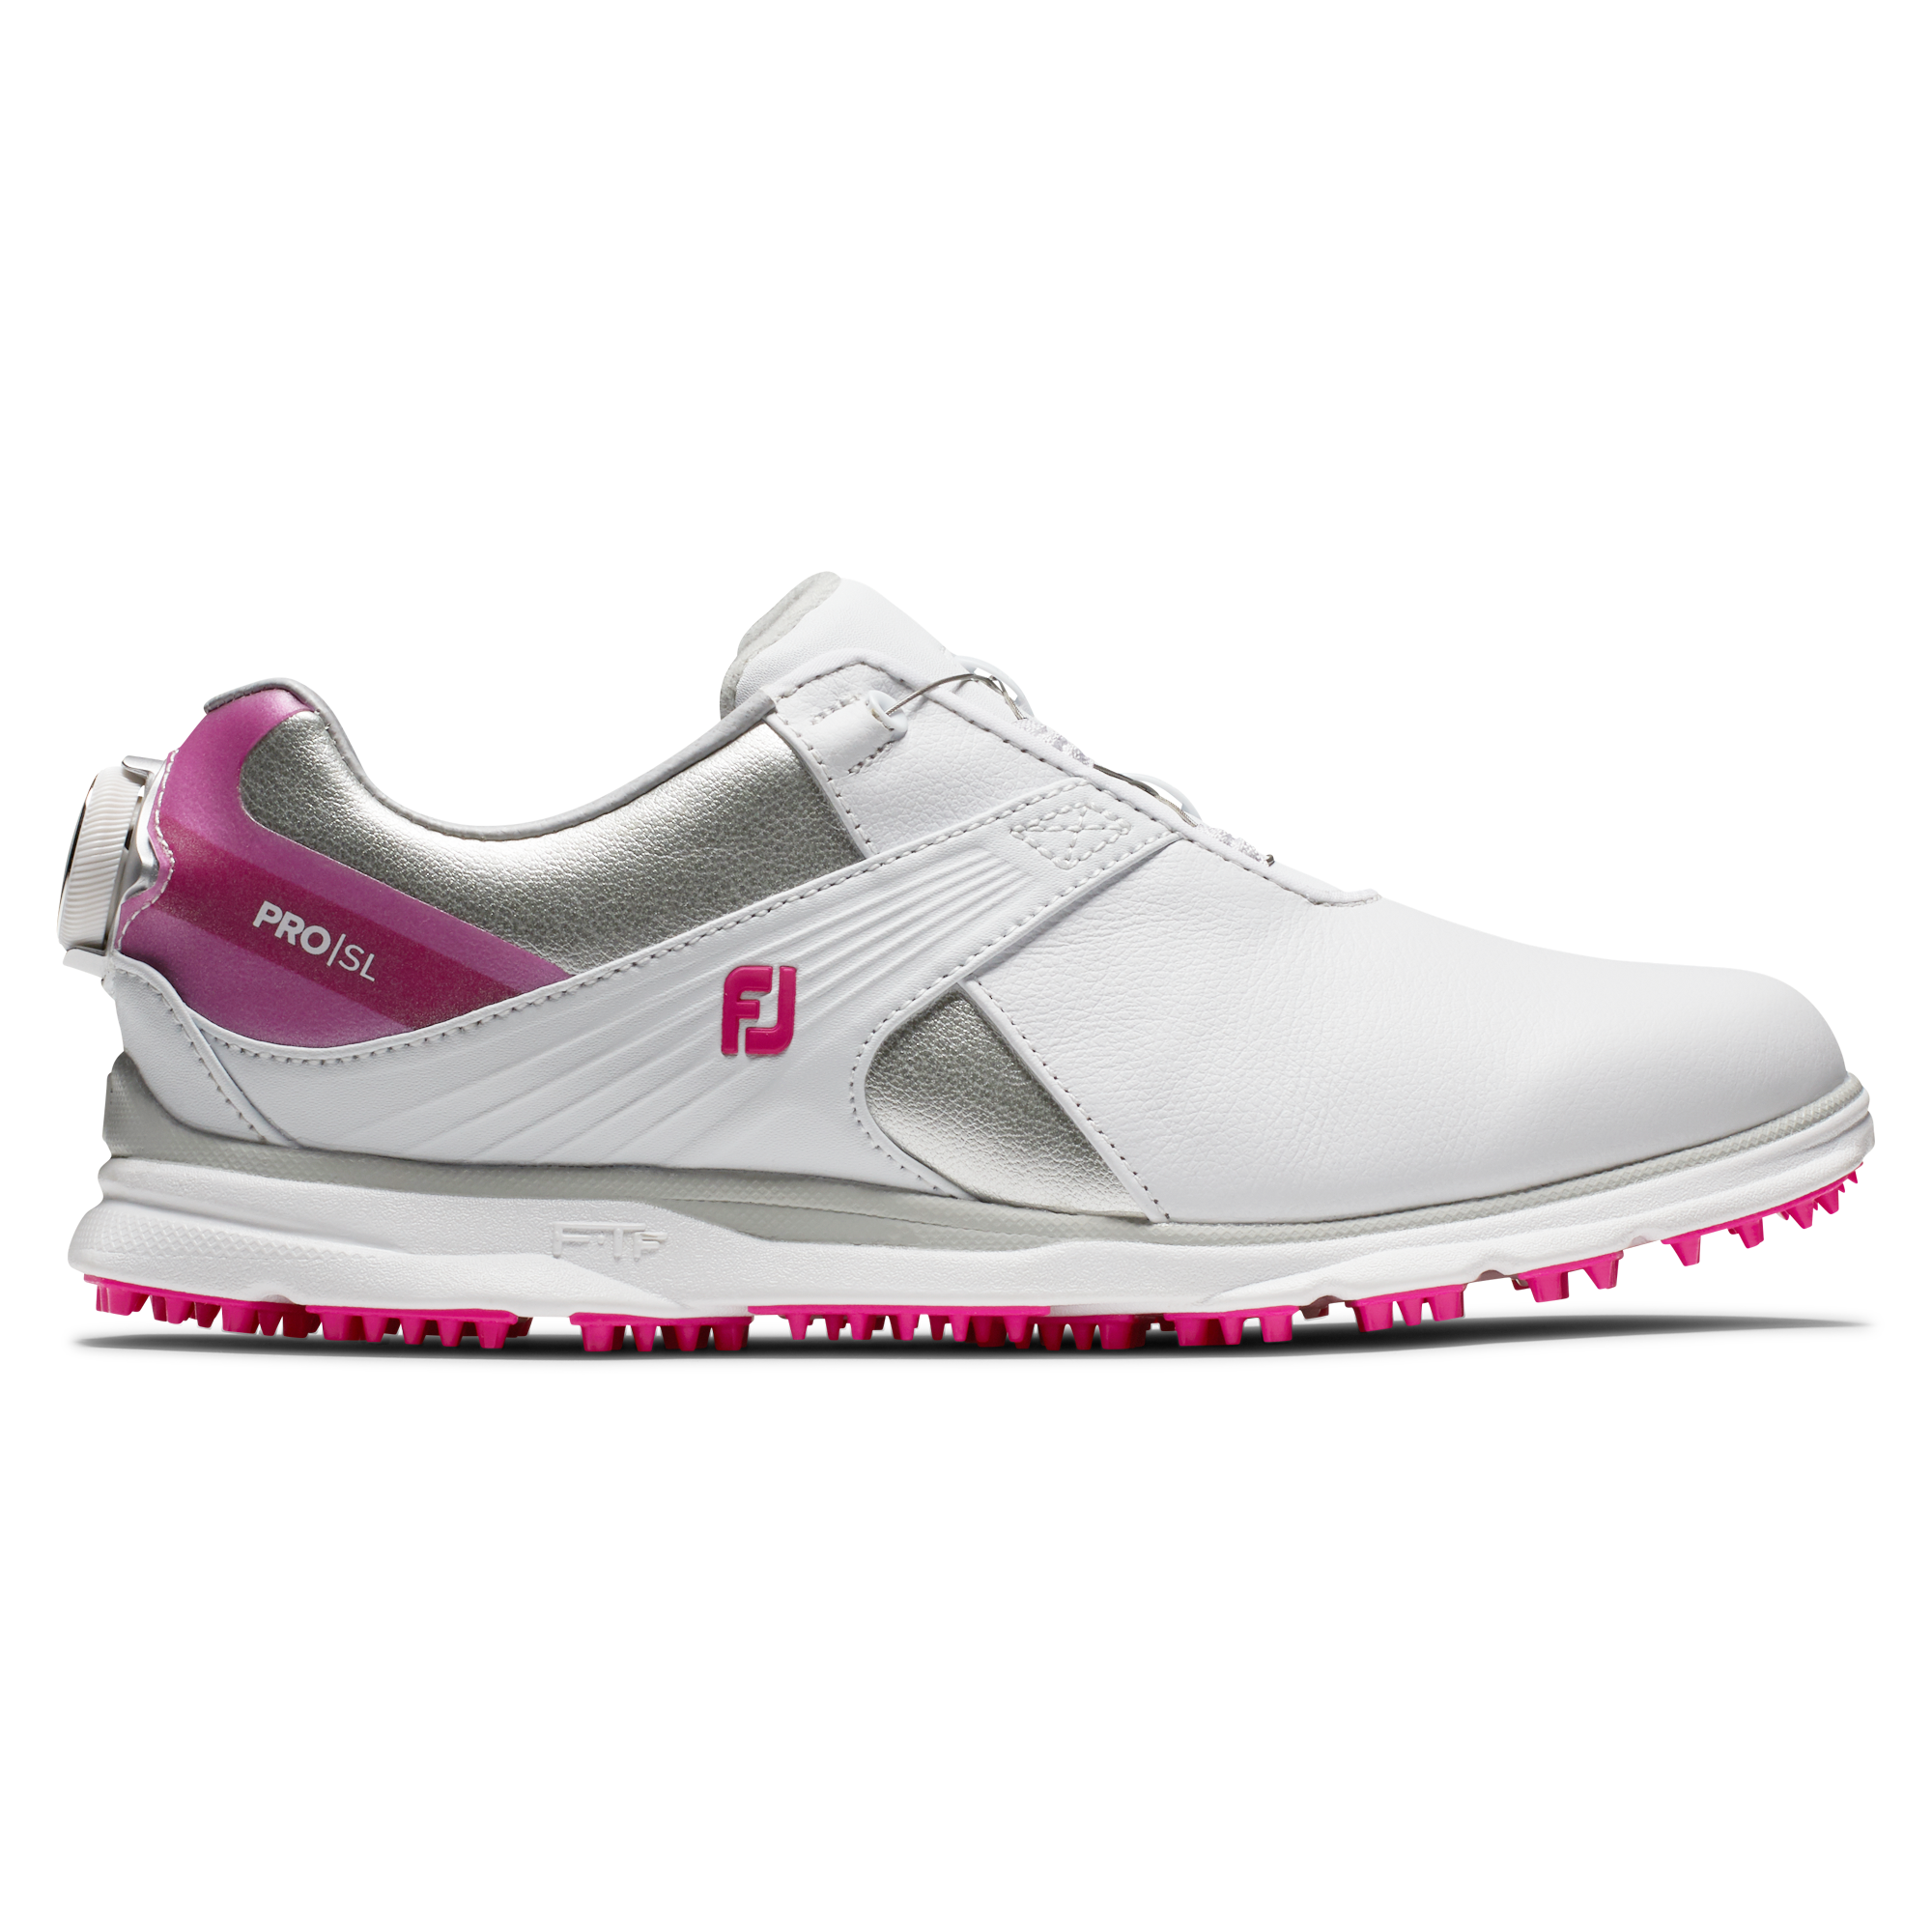 Women's Golf Shoes | The #1 Shoe in 